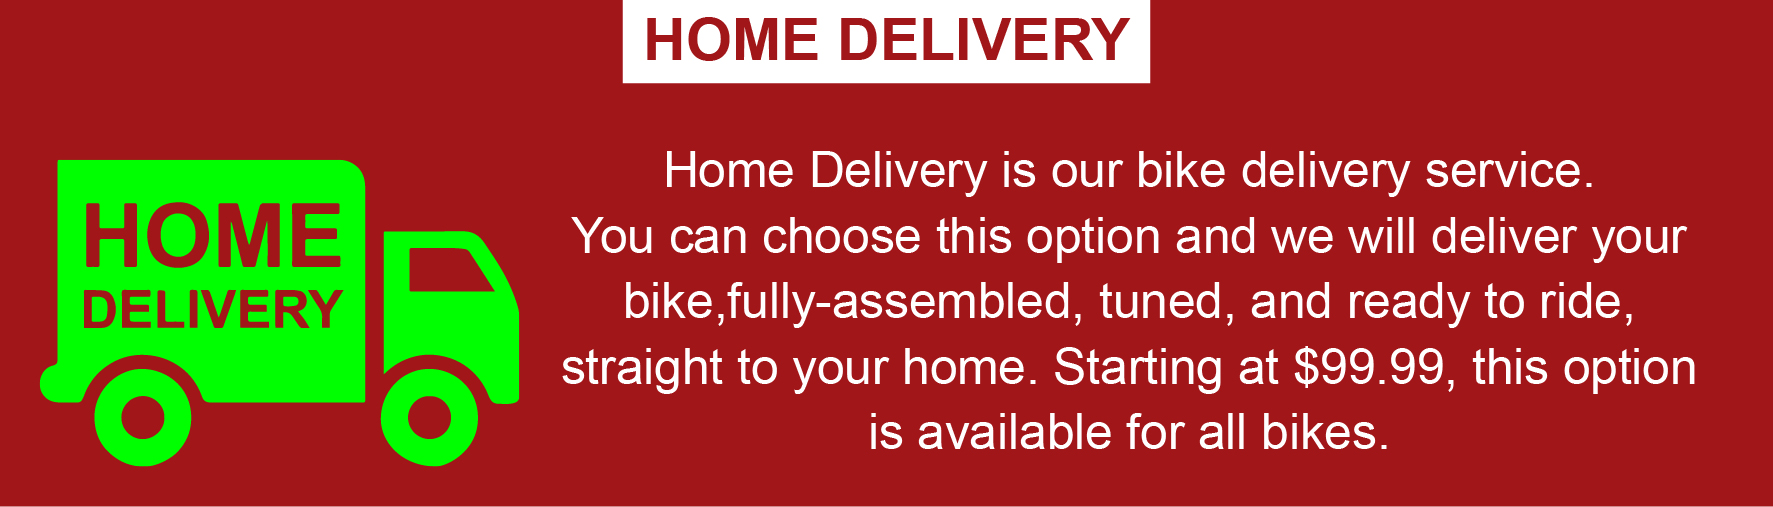 We have home delivery for bikes